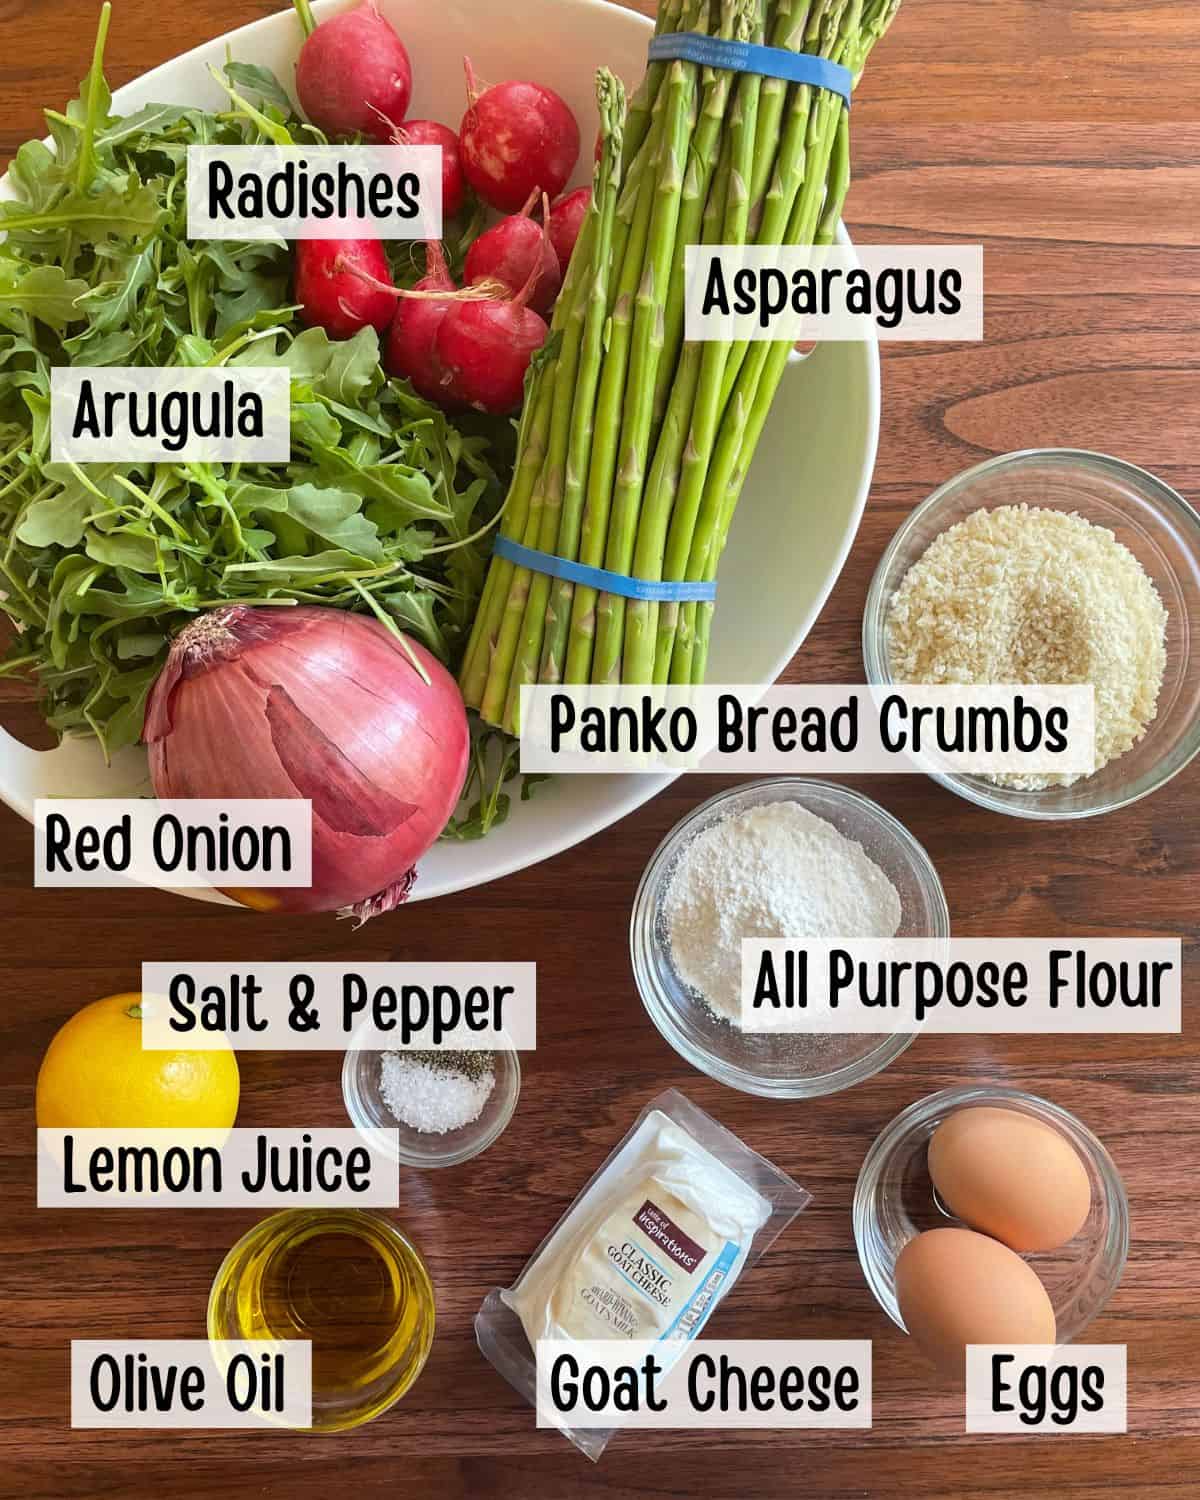 Ingredients needed to make the salad.